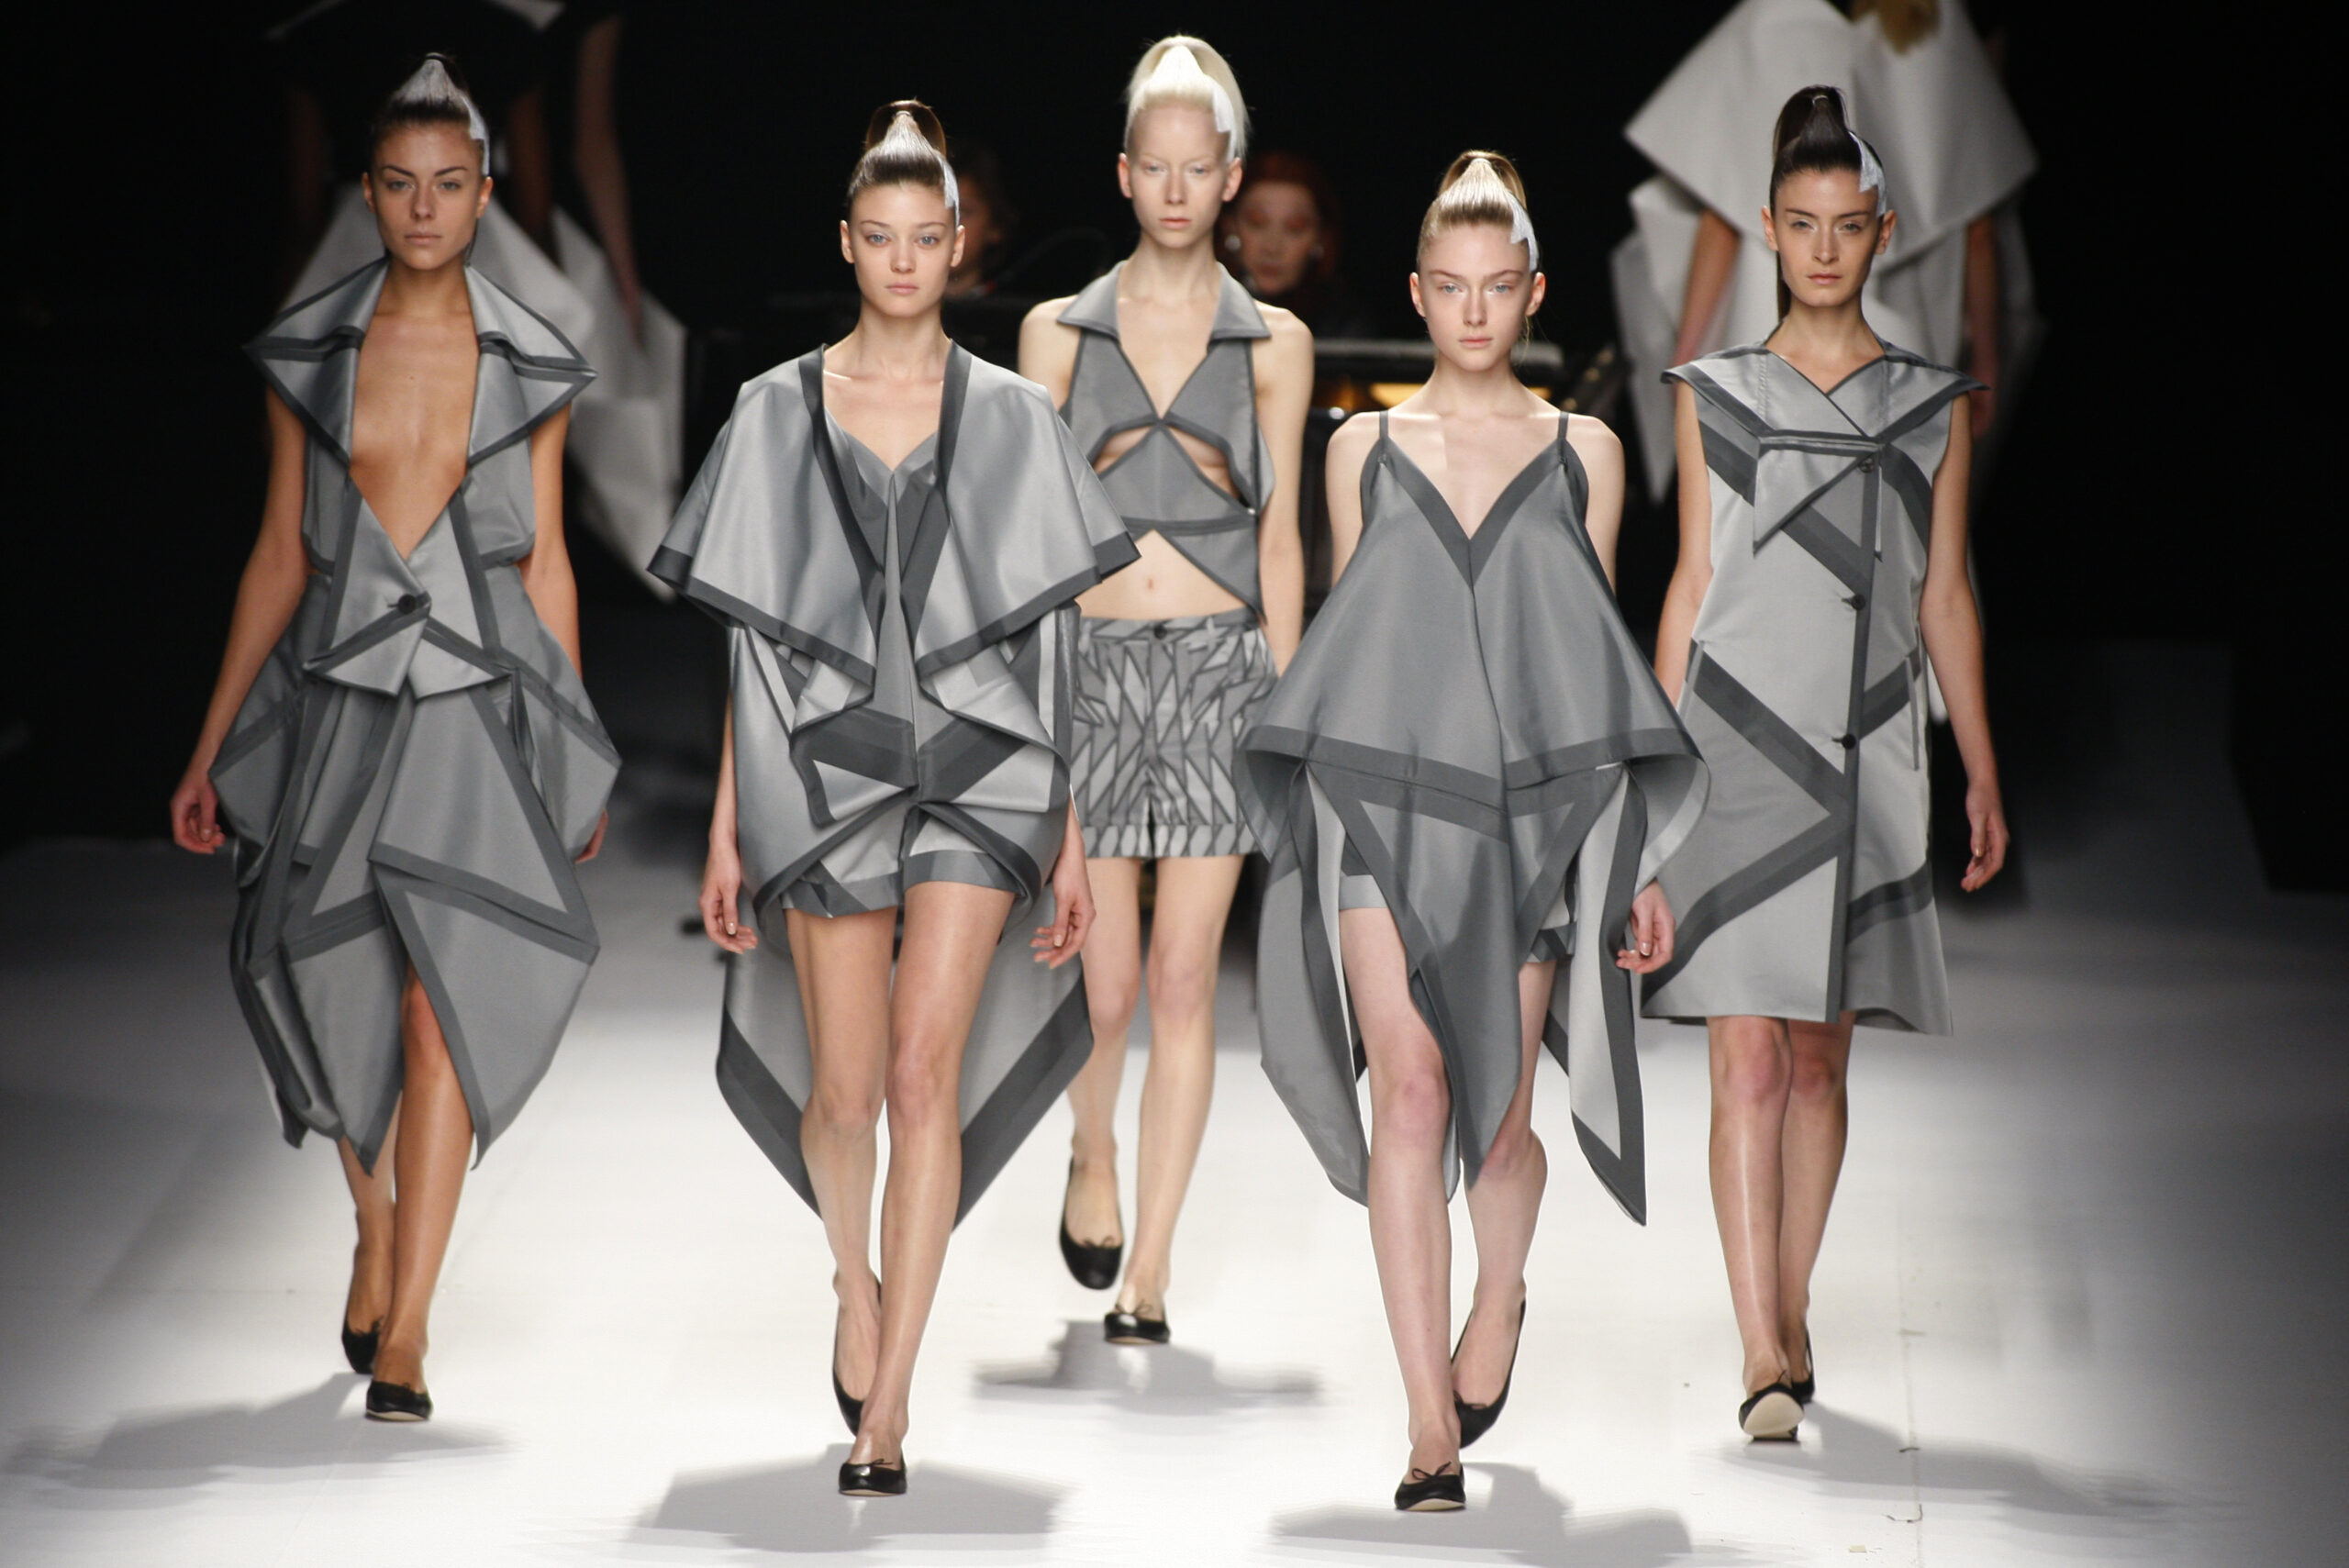 Issey Miyake's Most Iconic Designs Prove His Legacy Of Innovation